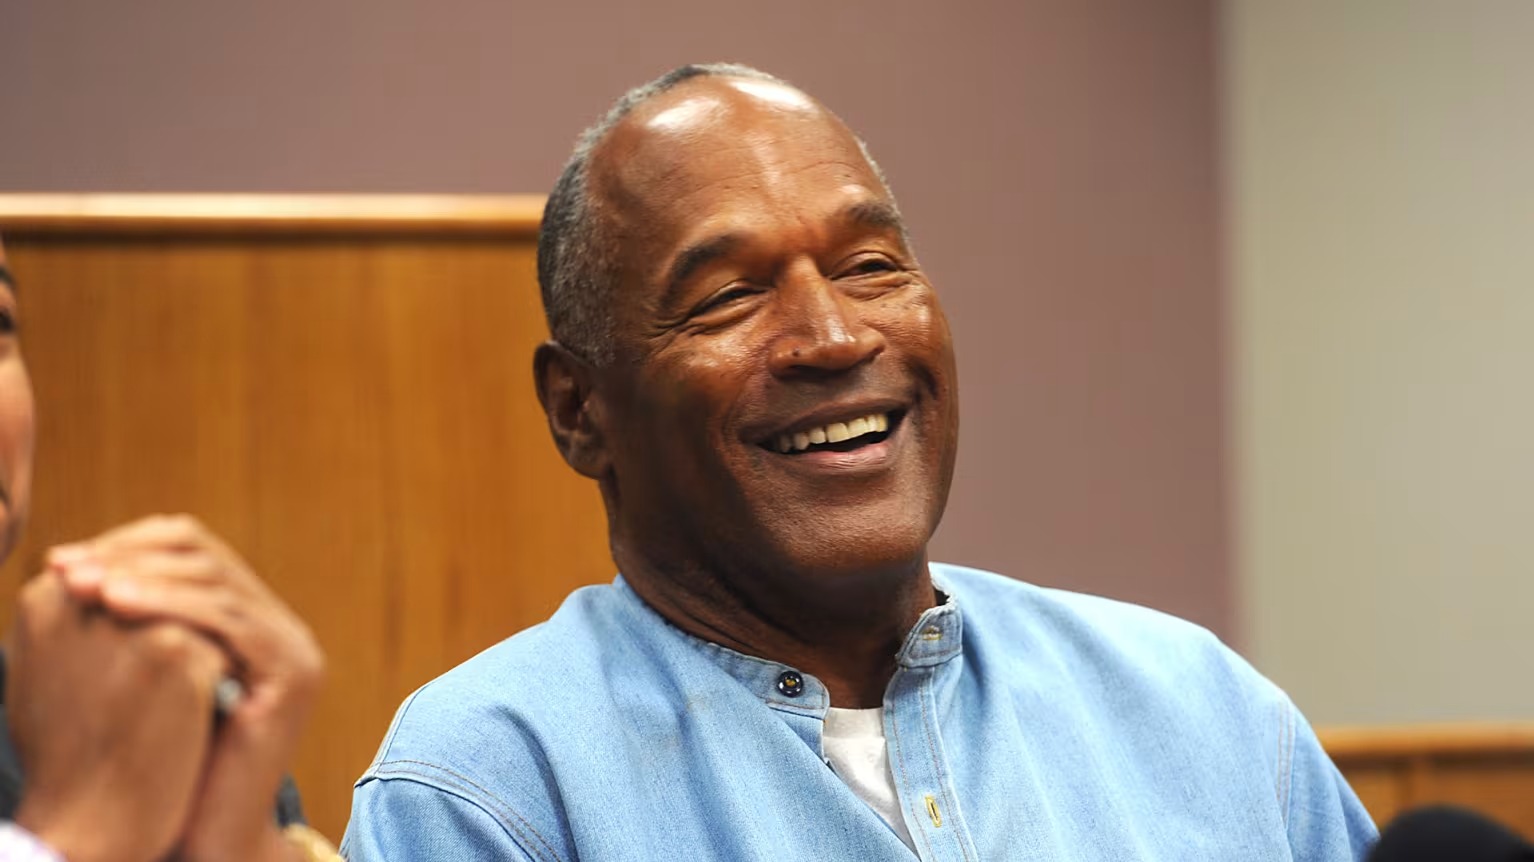 O.J. Simpson passes away after a long battle with cancer